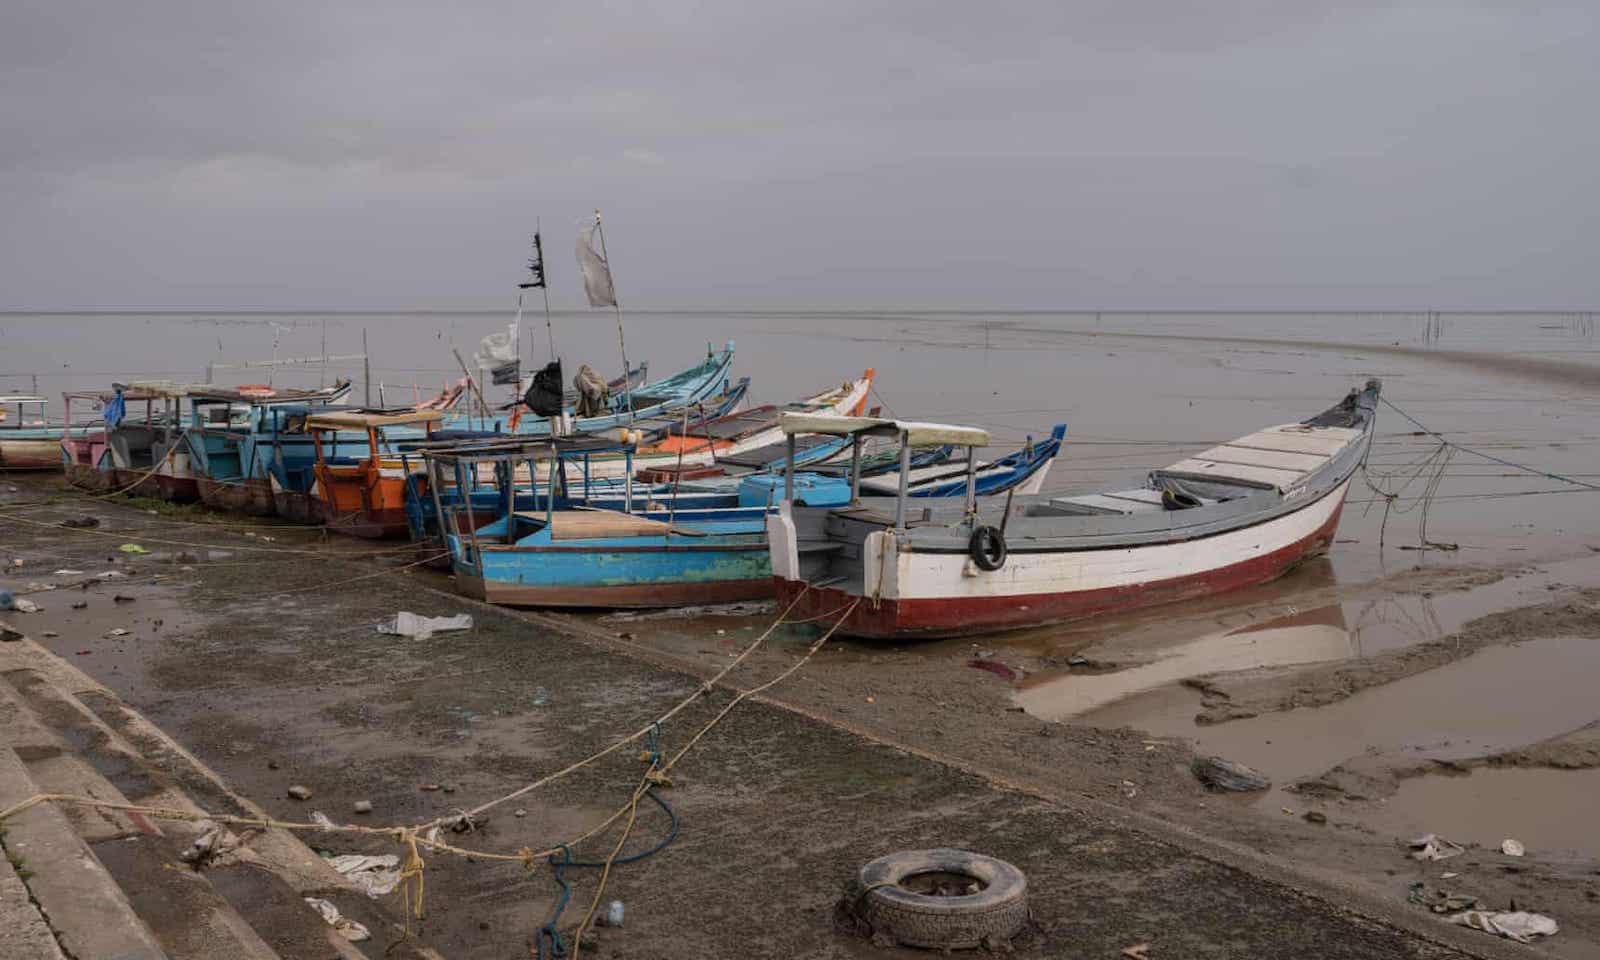 Fishing boats docked at Liliendaal, Georgetown. Some fishers say vibrations from oil exploration are driving away the fish and shrimp.